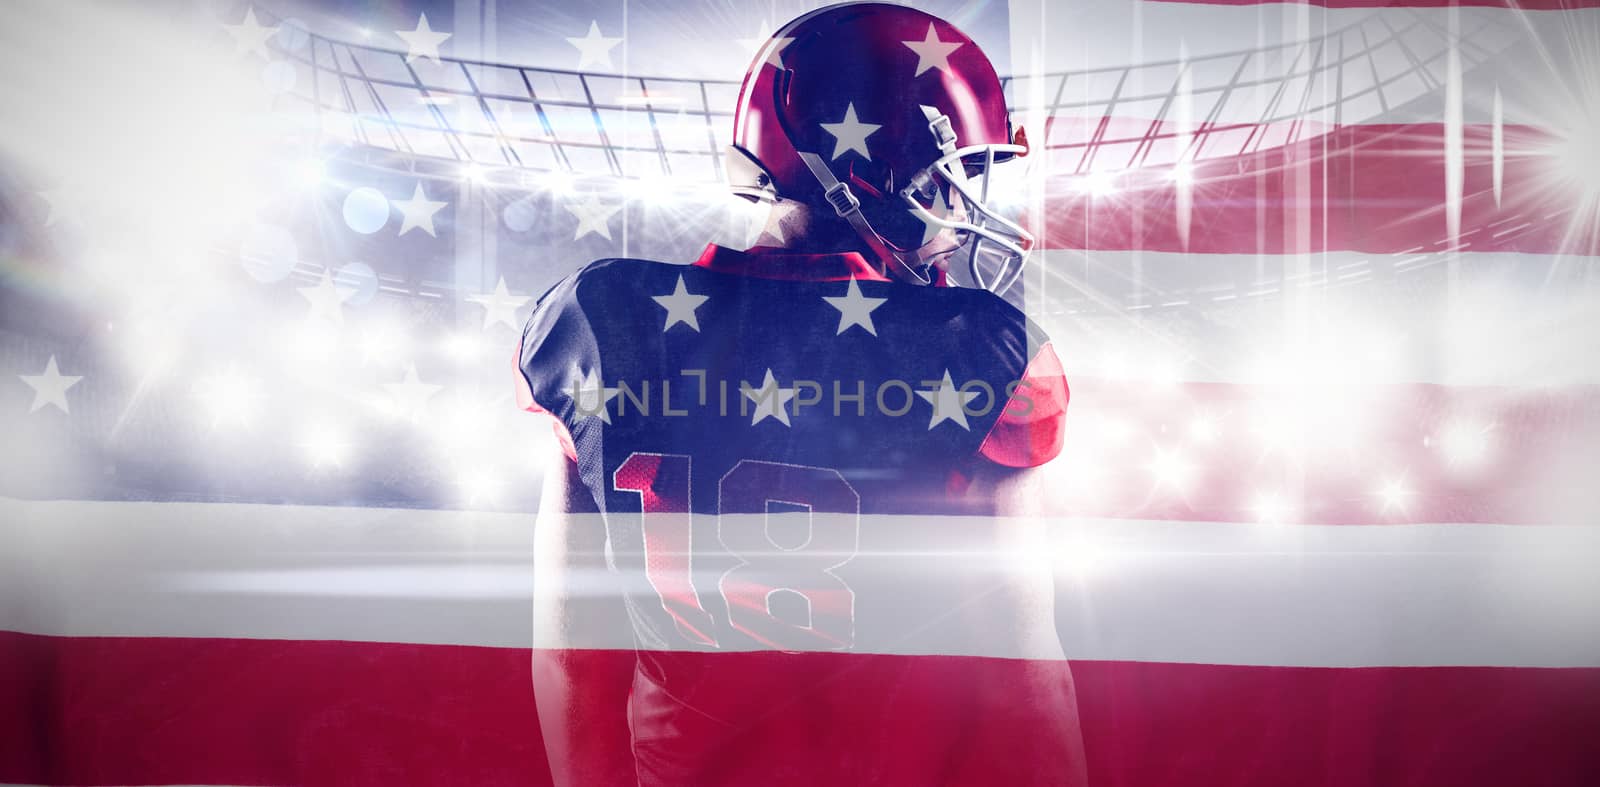 American football player standing in rugby helmet against directly above shot of national flag